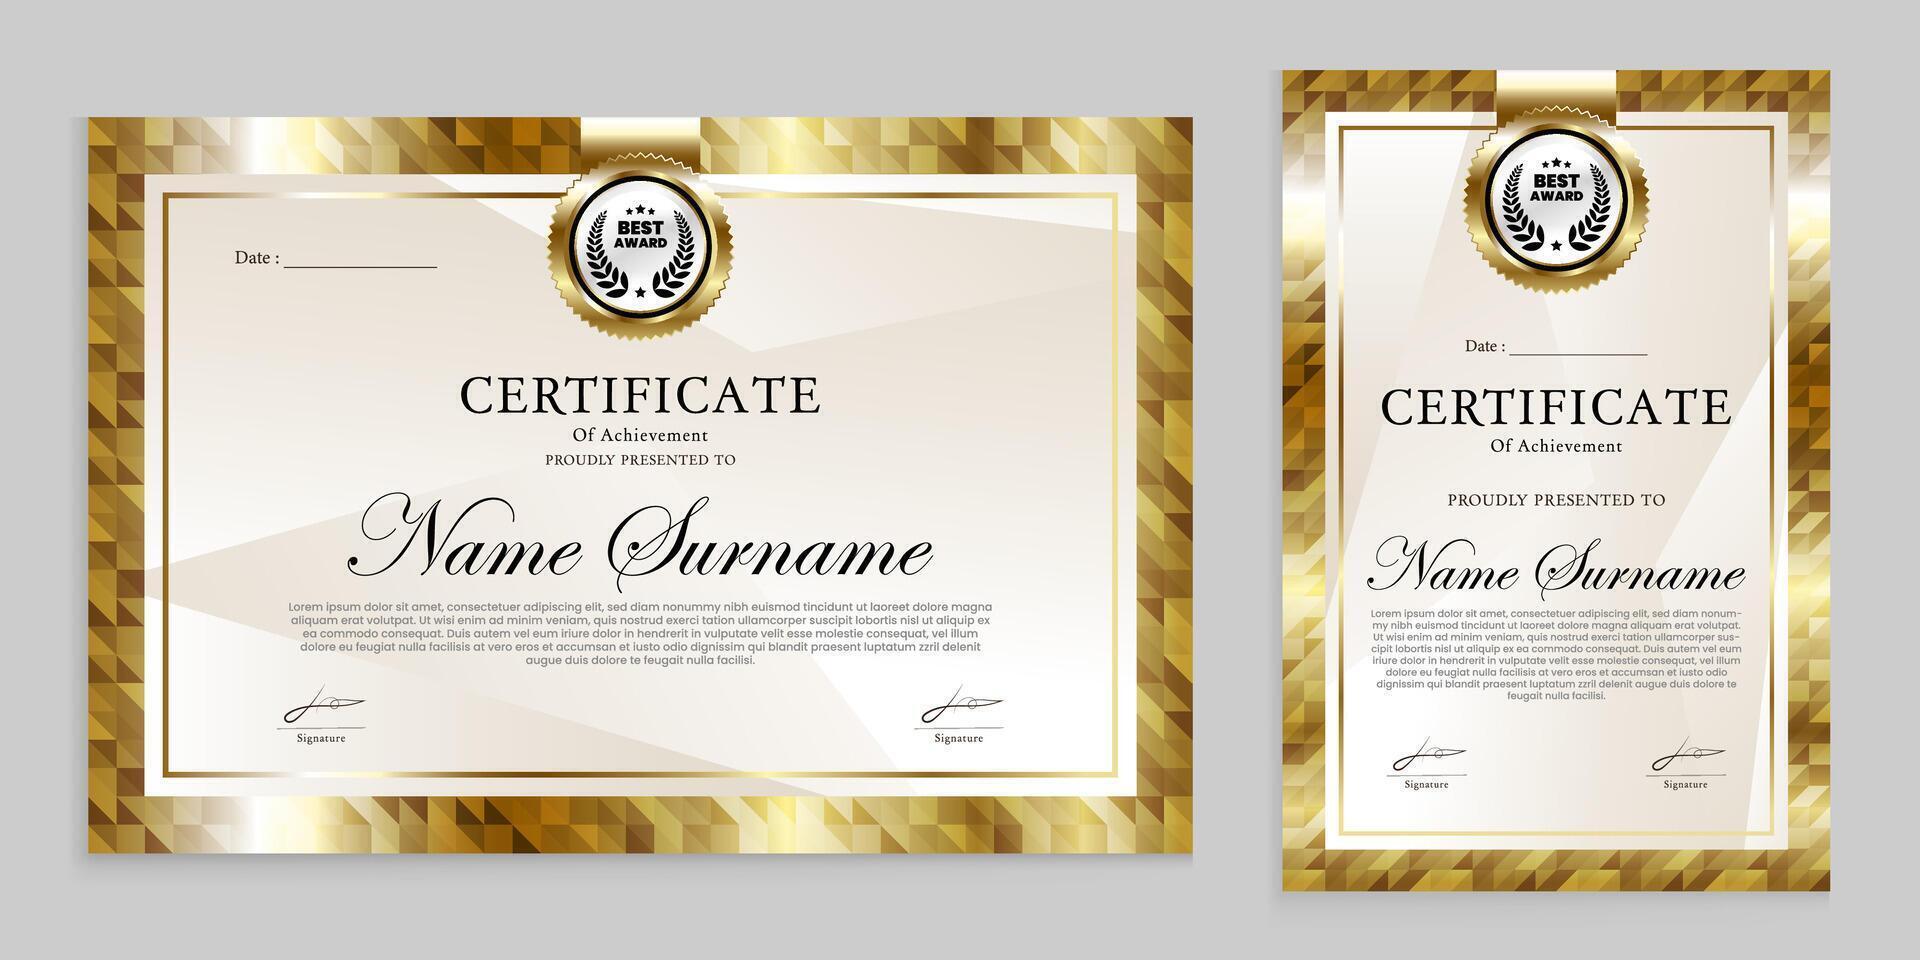 Award certificate design with luxury gold modern theme. Charters, achievements, plaques are suitable for various events. vector